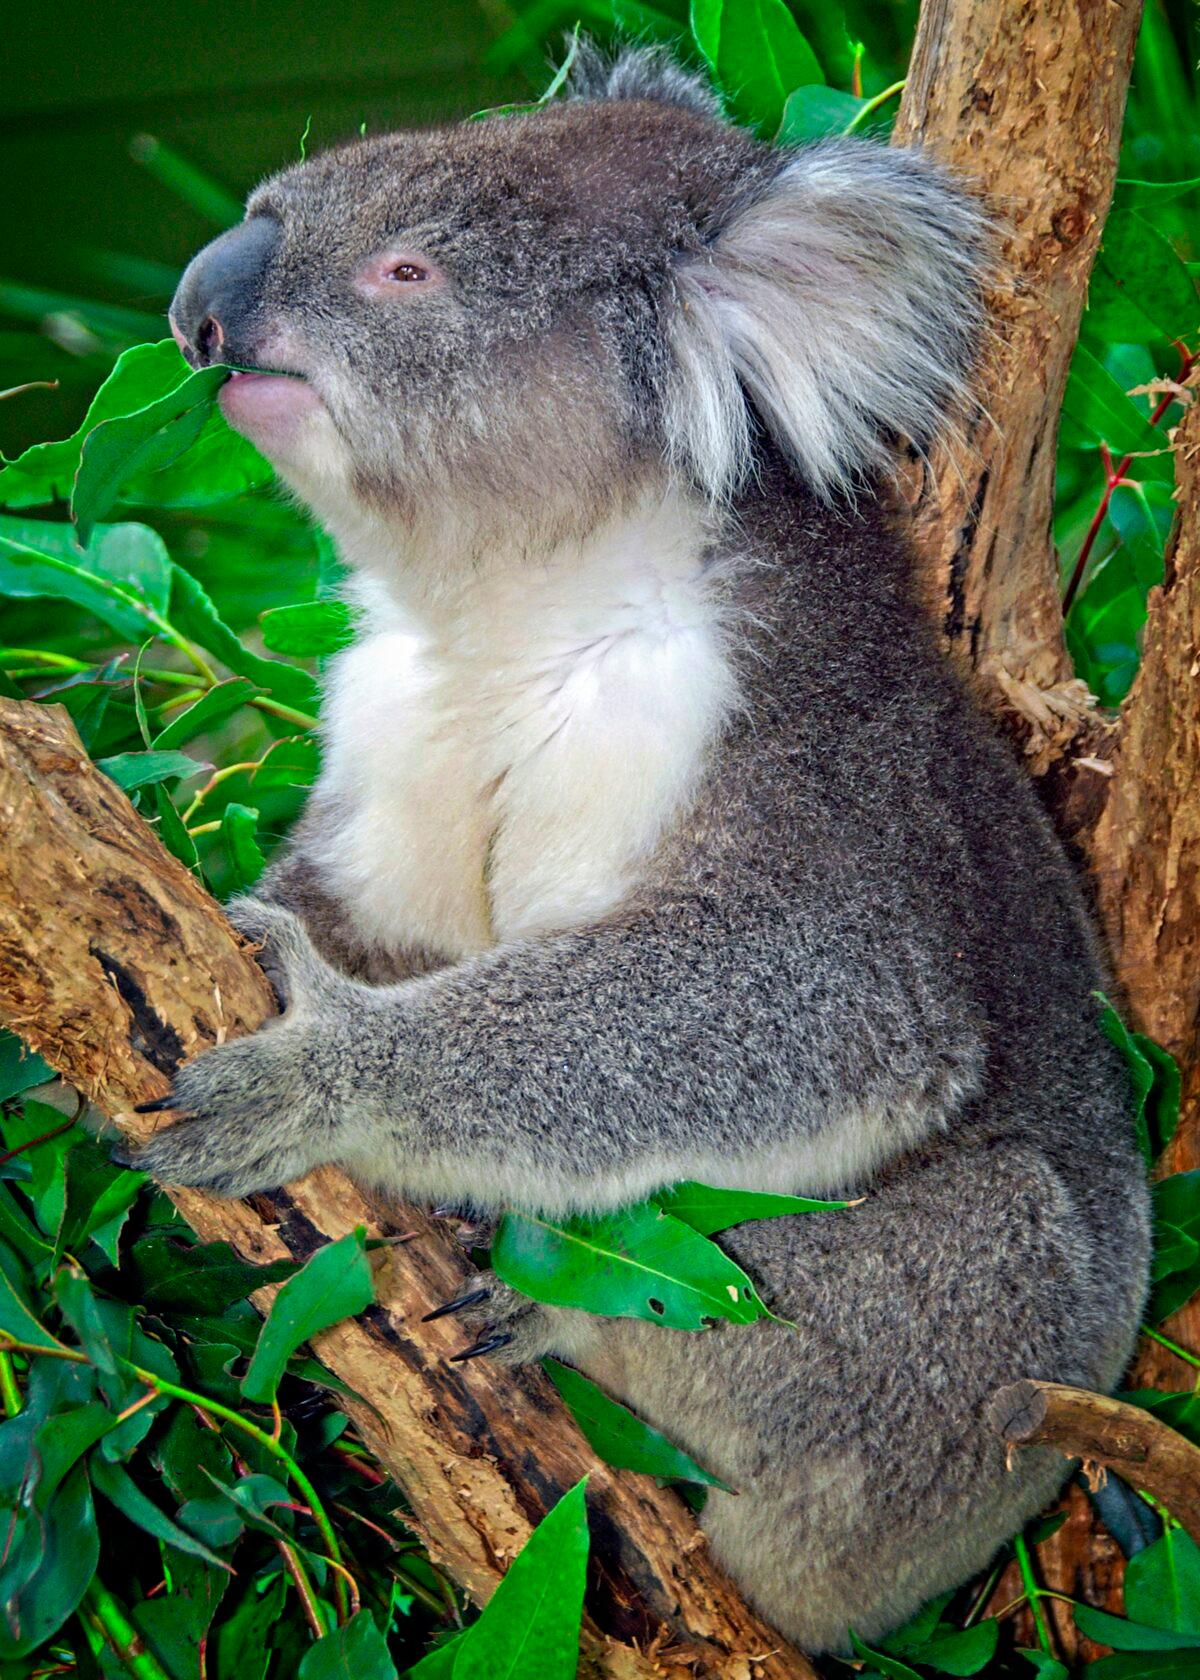 It’s a koala—there’s no such thing as a koala bear—and this plump, fuzzy, cuddly marsupial is every bit an icon of Australia as the kangaroo. (Fred J. Eckert)